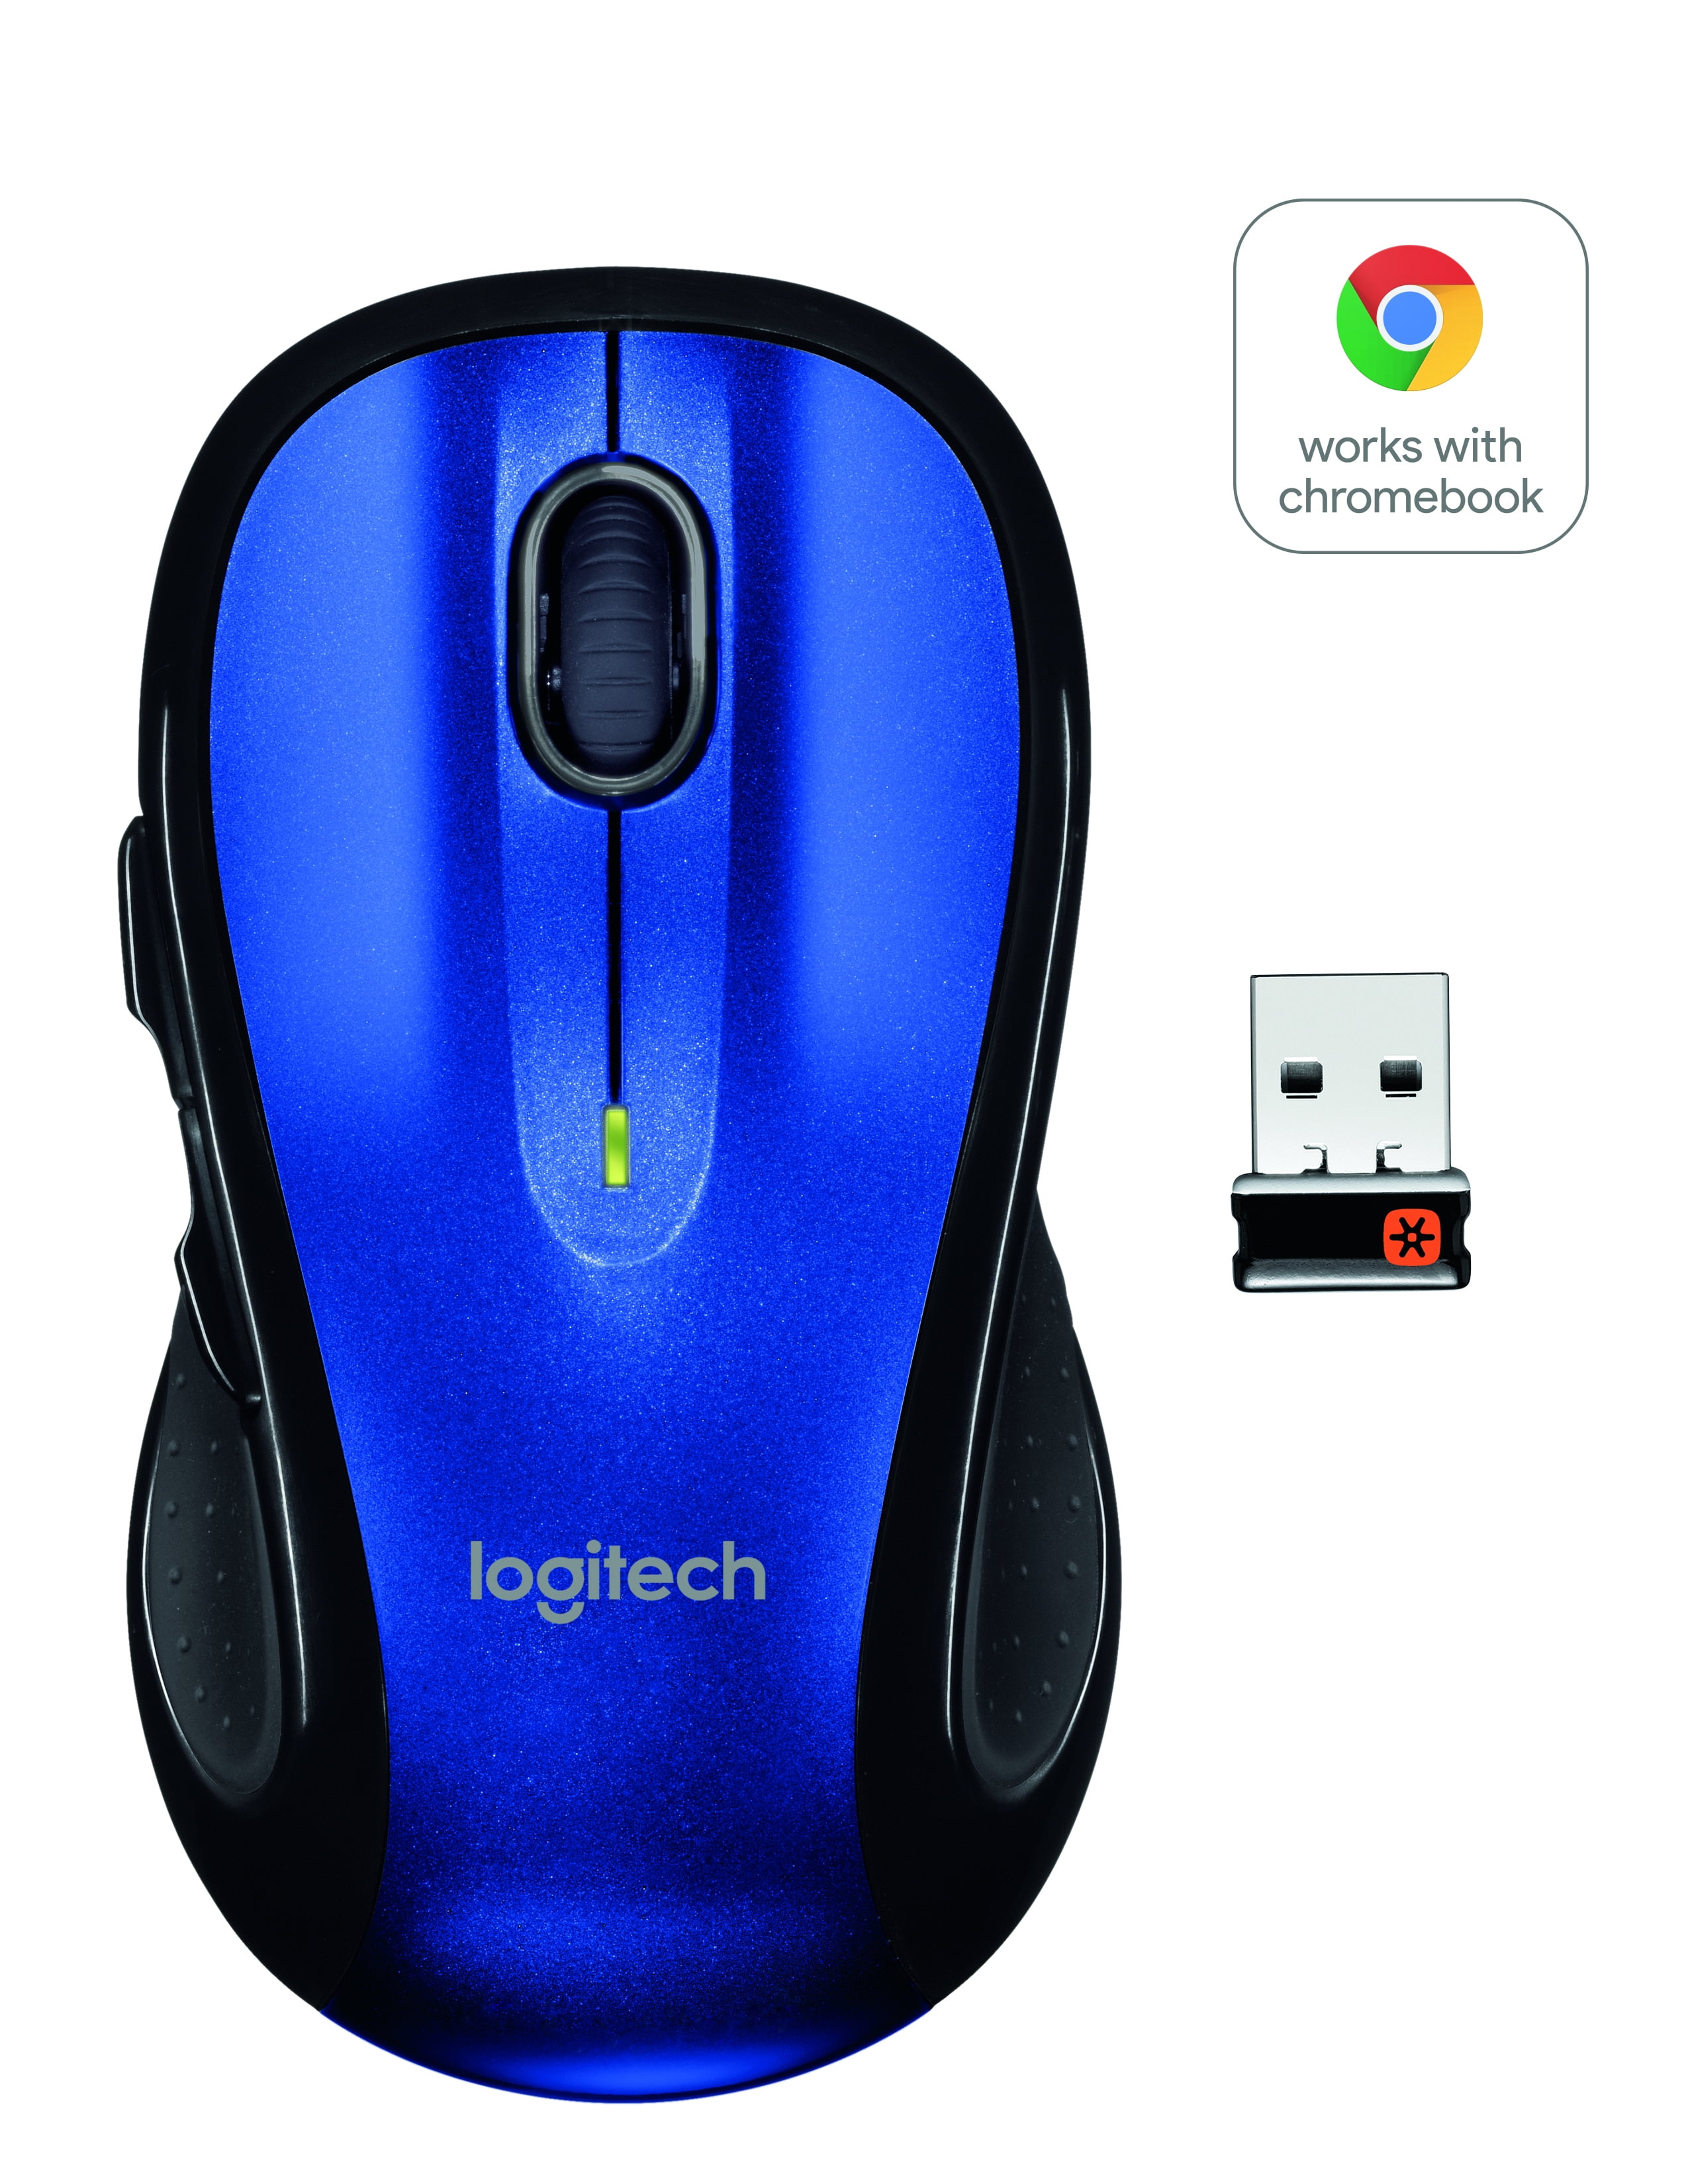 Logitech M510 Wireless Mouse with Laser-grade Tracking